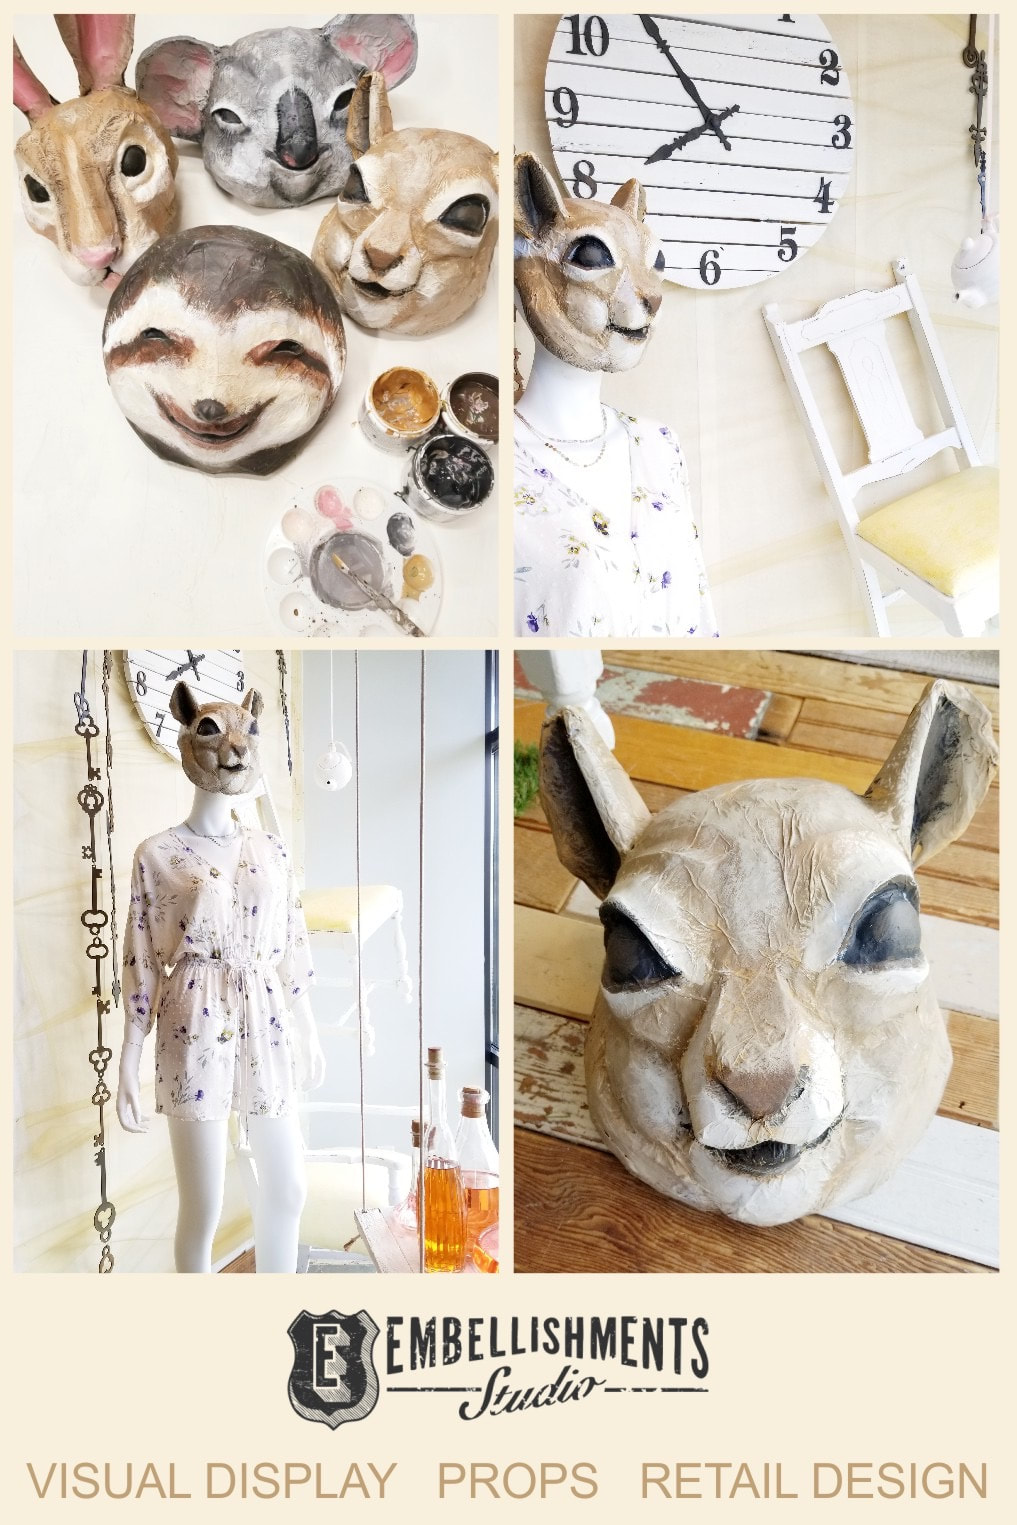 Wonderland Spring Store Display featuring a paper mache squirrel chipmunk and other animal masks by Embellishments Studio 